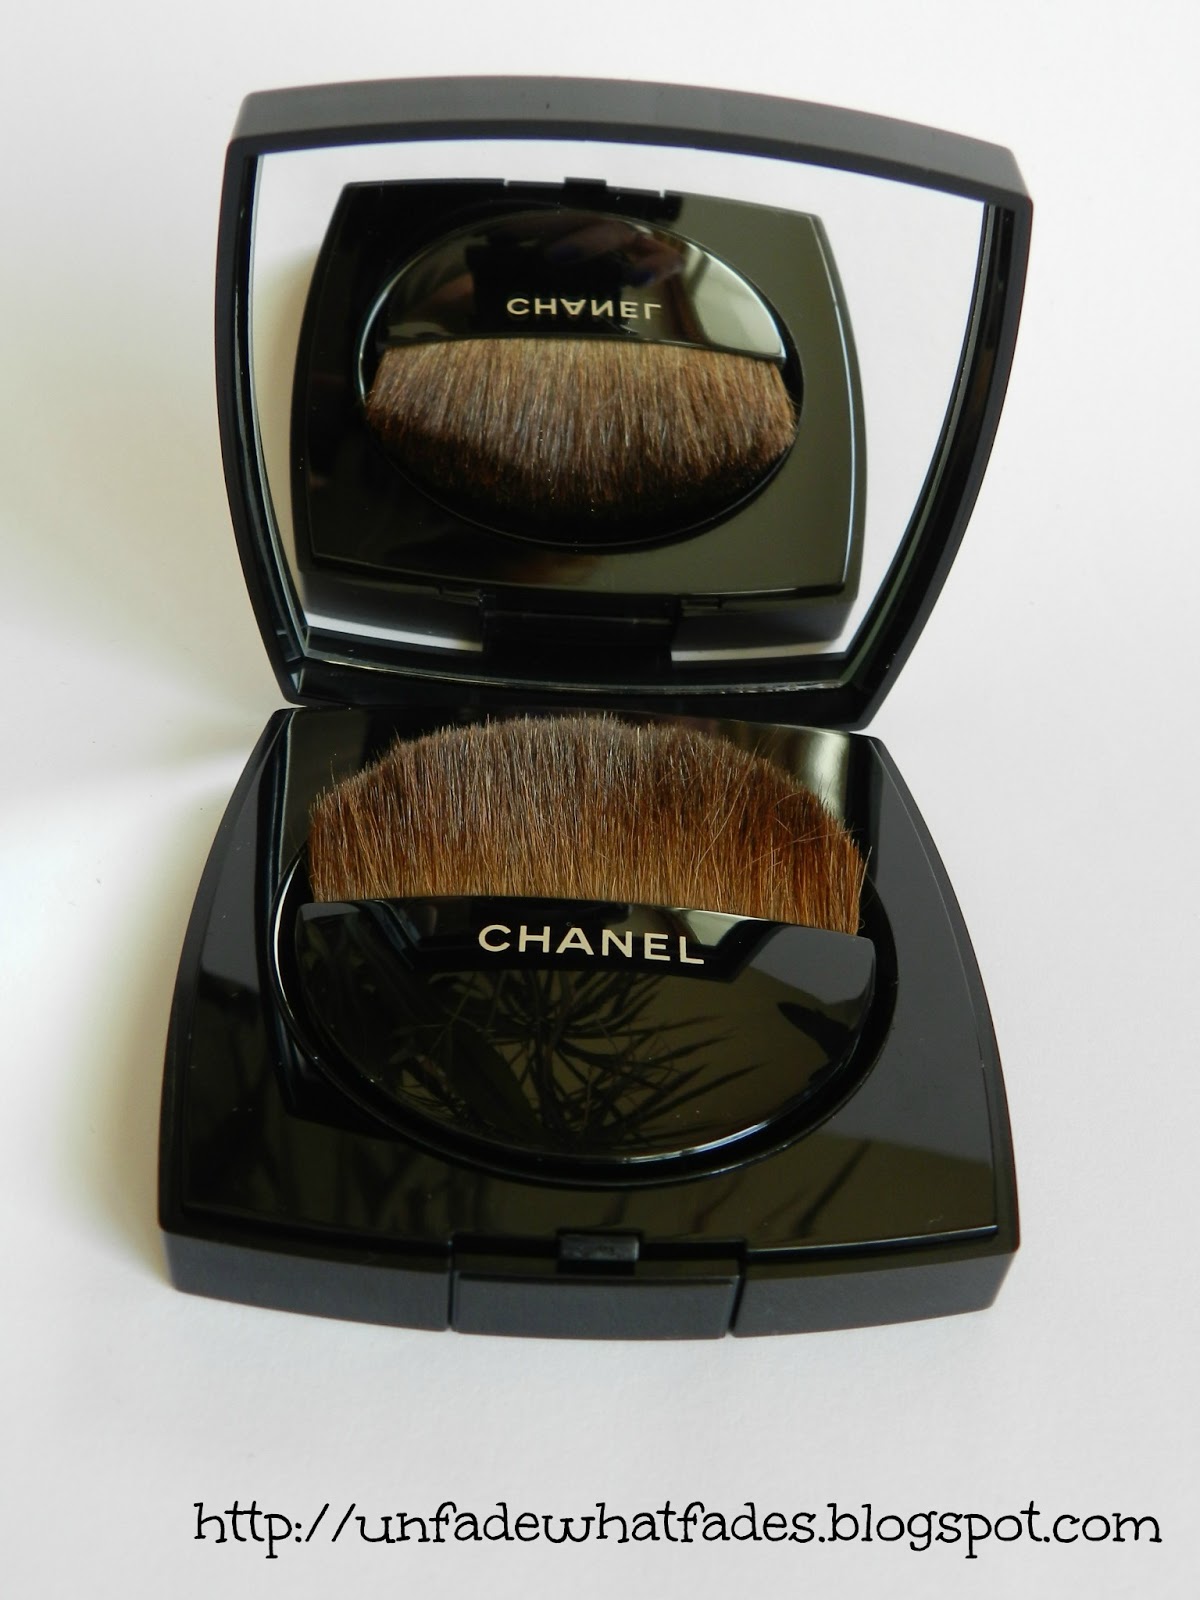 CHANEL Les Beiges Healthy Glow Sheer Powder - Reviews